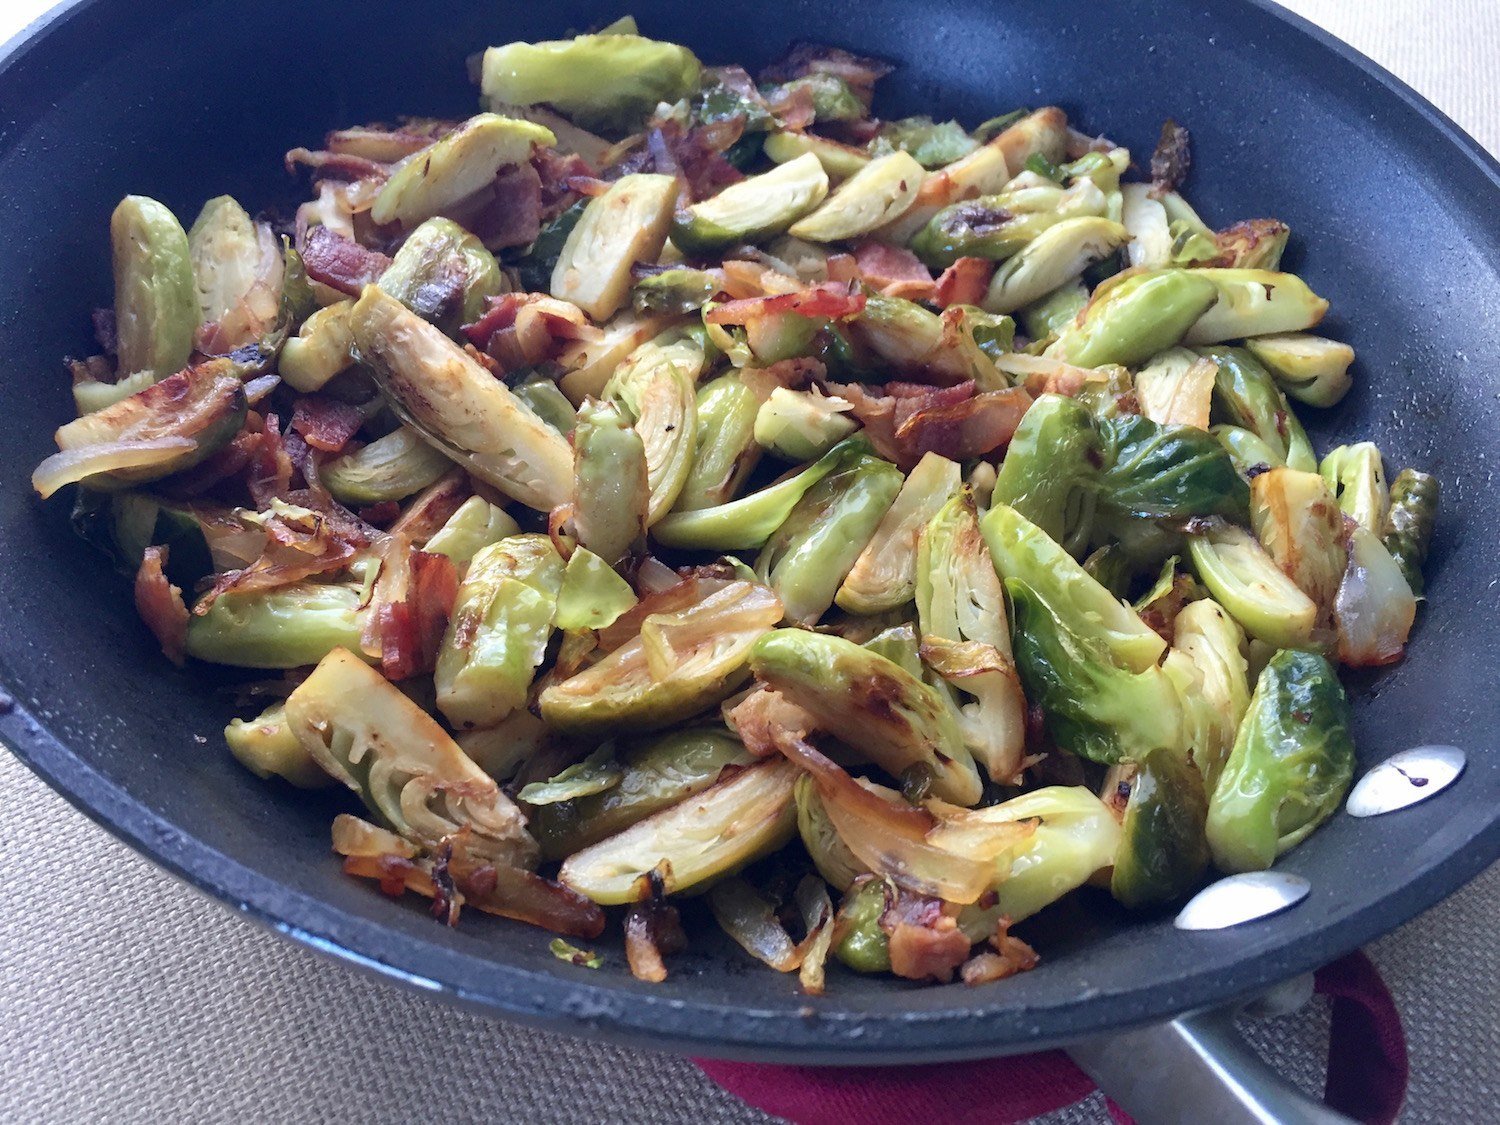 Brussels sprouts in a pan with onion and bacon